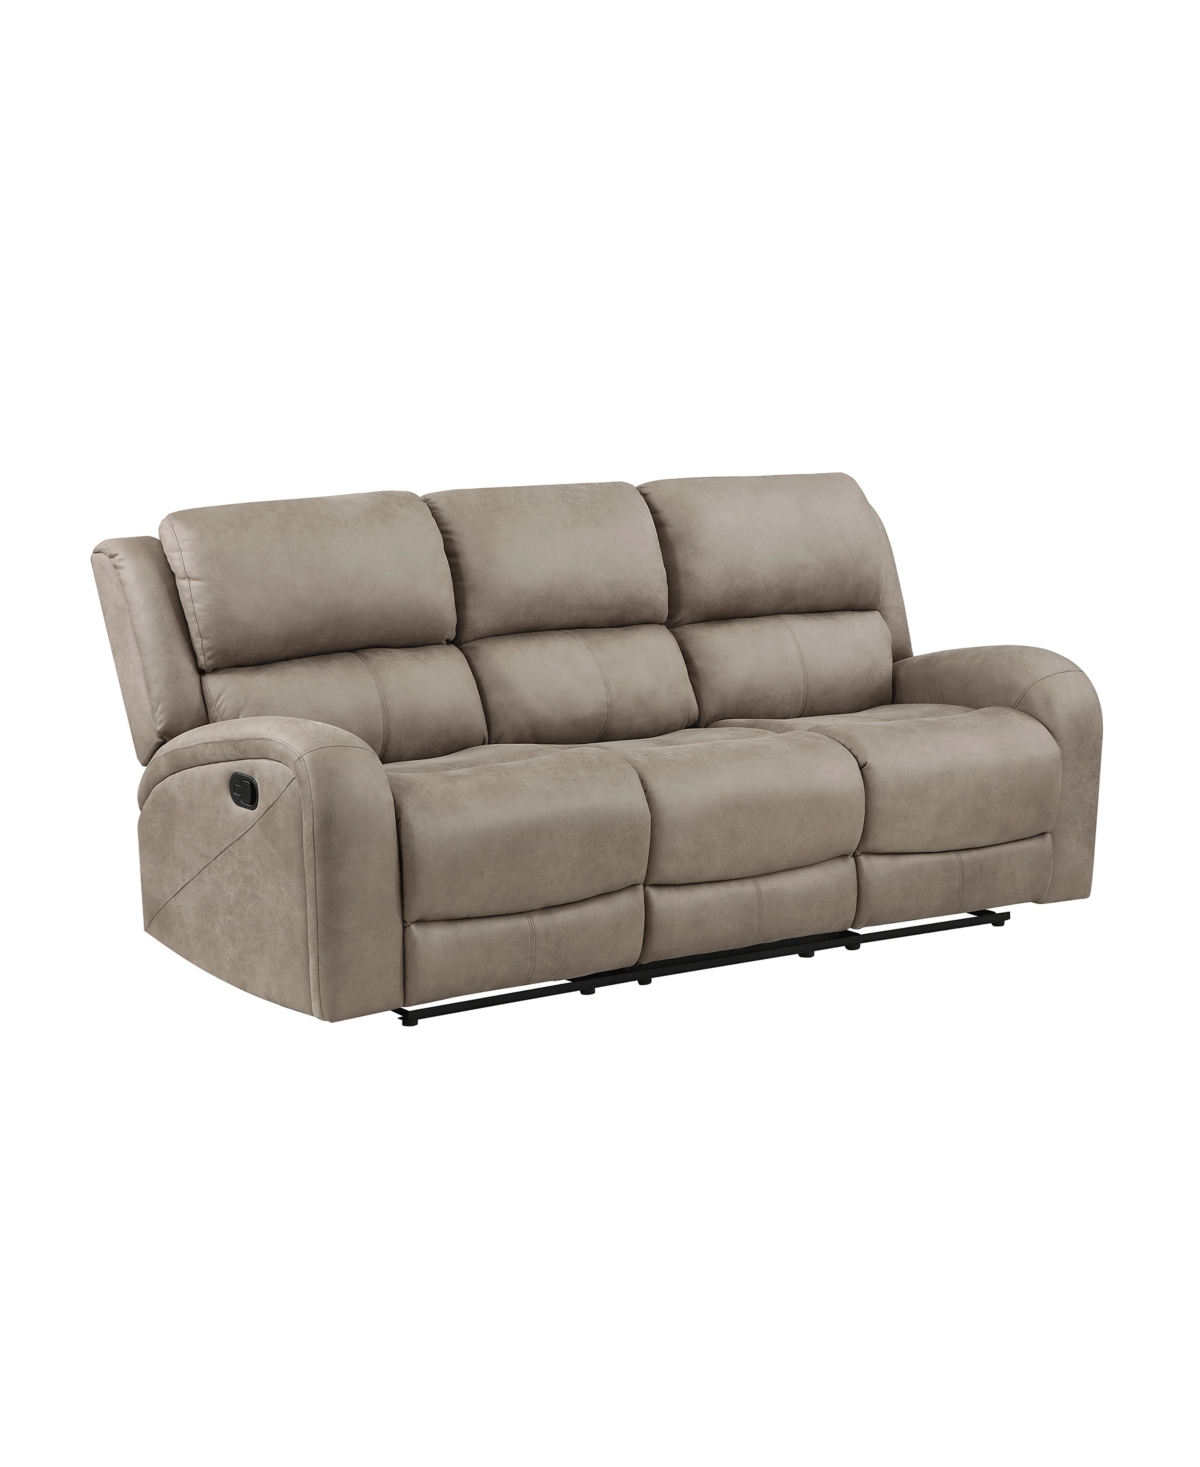 Homelegance White Label Aubrey 85" Double Reclining Sofa In Brown